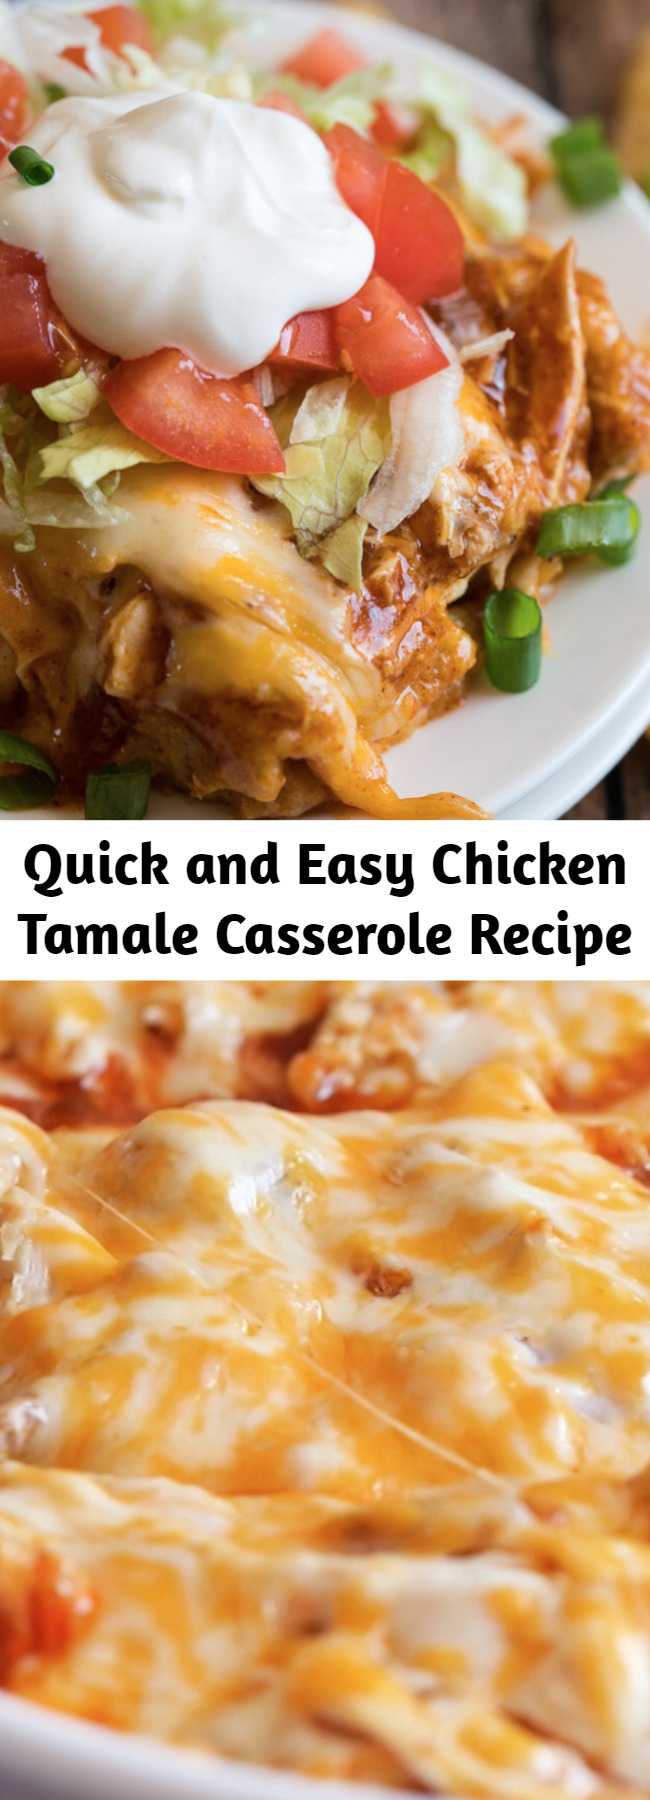 Quick and Easy Chicken Tamale Casserole Recipe - This cheesy Chicken Tamale Casserole is a quick and easy family weeknight dinner that has all the flavors of classic tamales without all the fuss!